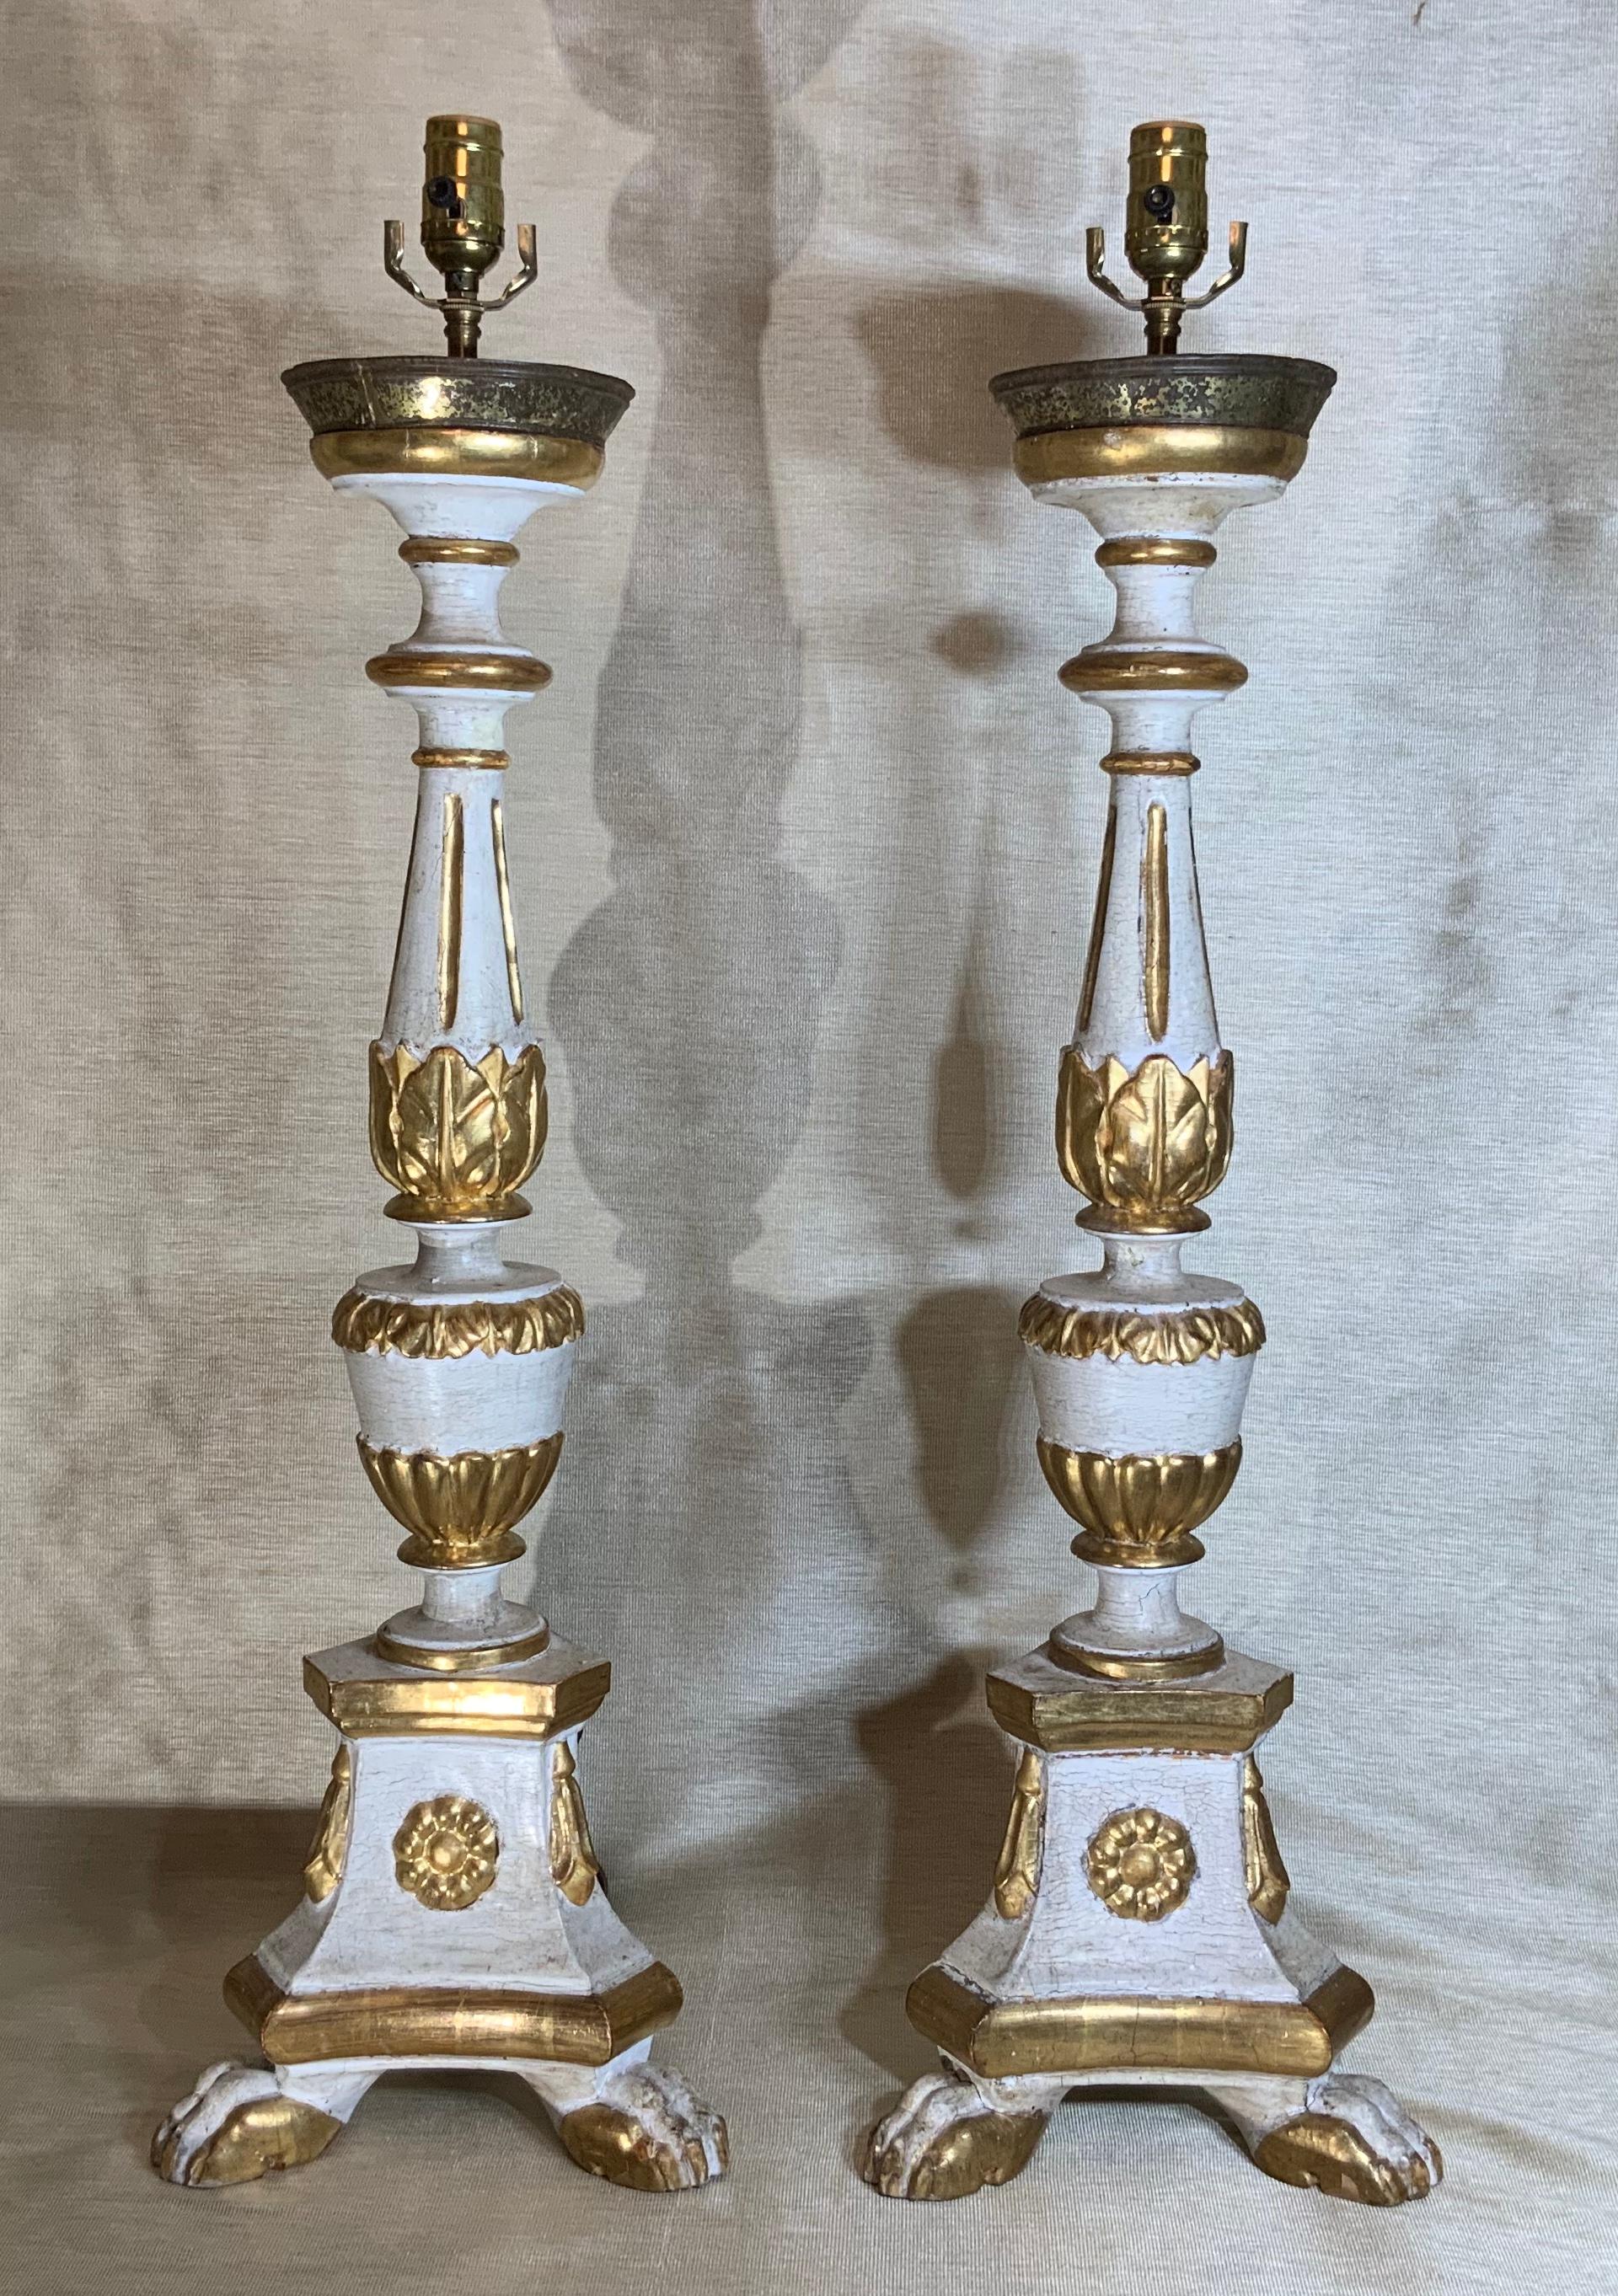 Pair of vintage Italian neoclassical style carved gold giltwood candlesticks converted to beautiful table lamps, features white cream gesso and gold gilt polychrome finish, solid carved wood, two front paw feet and one support in the back. Round top